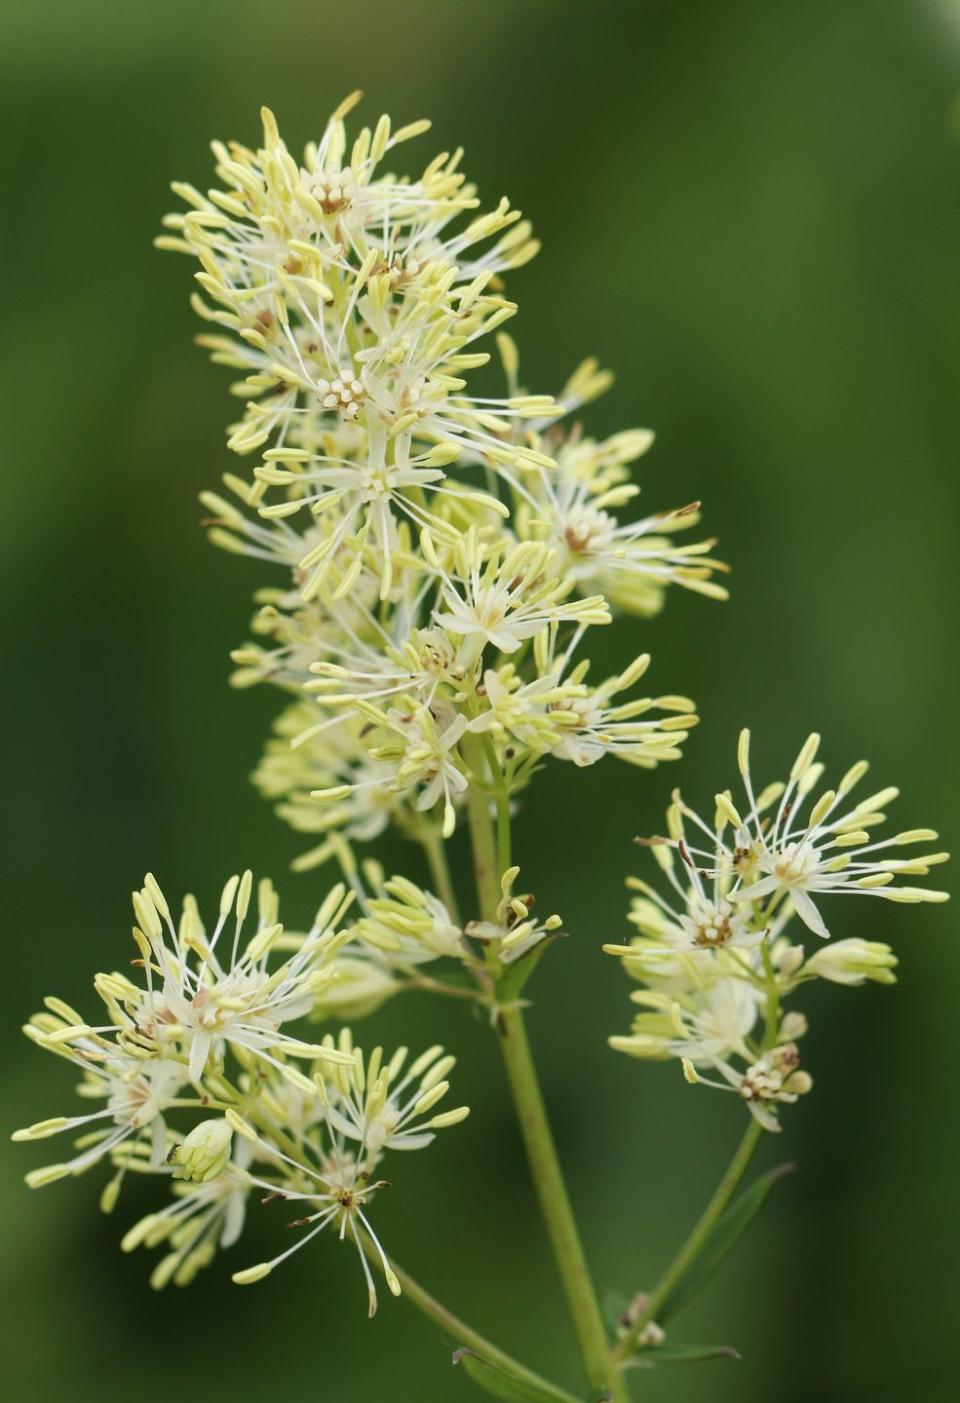 the flower of a common meadow rue plant, thalictrum flavum, growing along the side of a stream